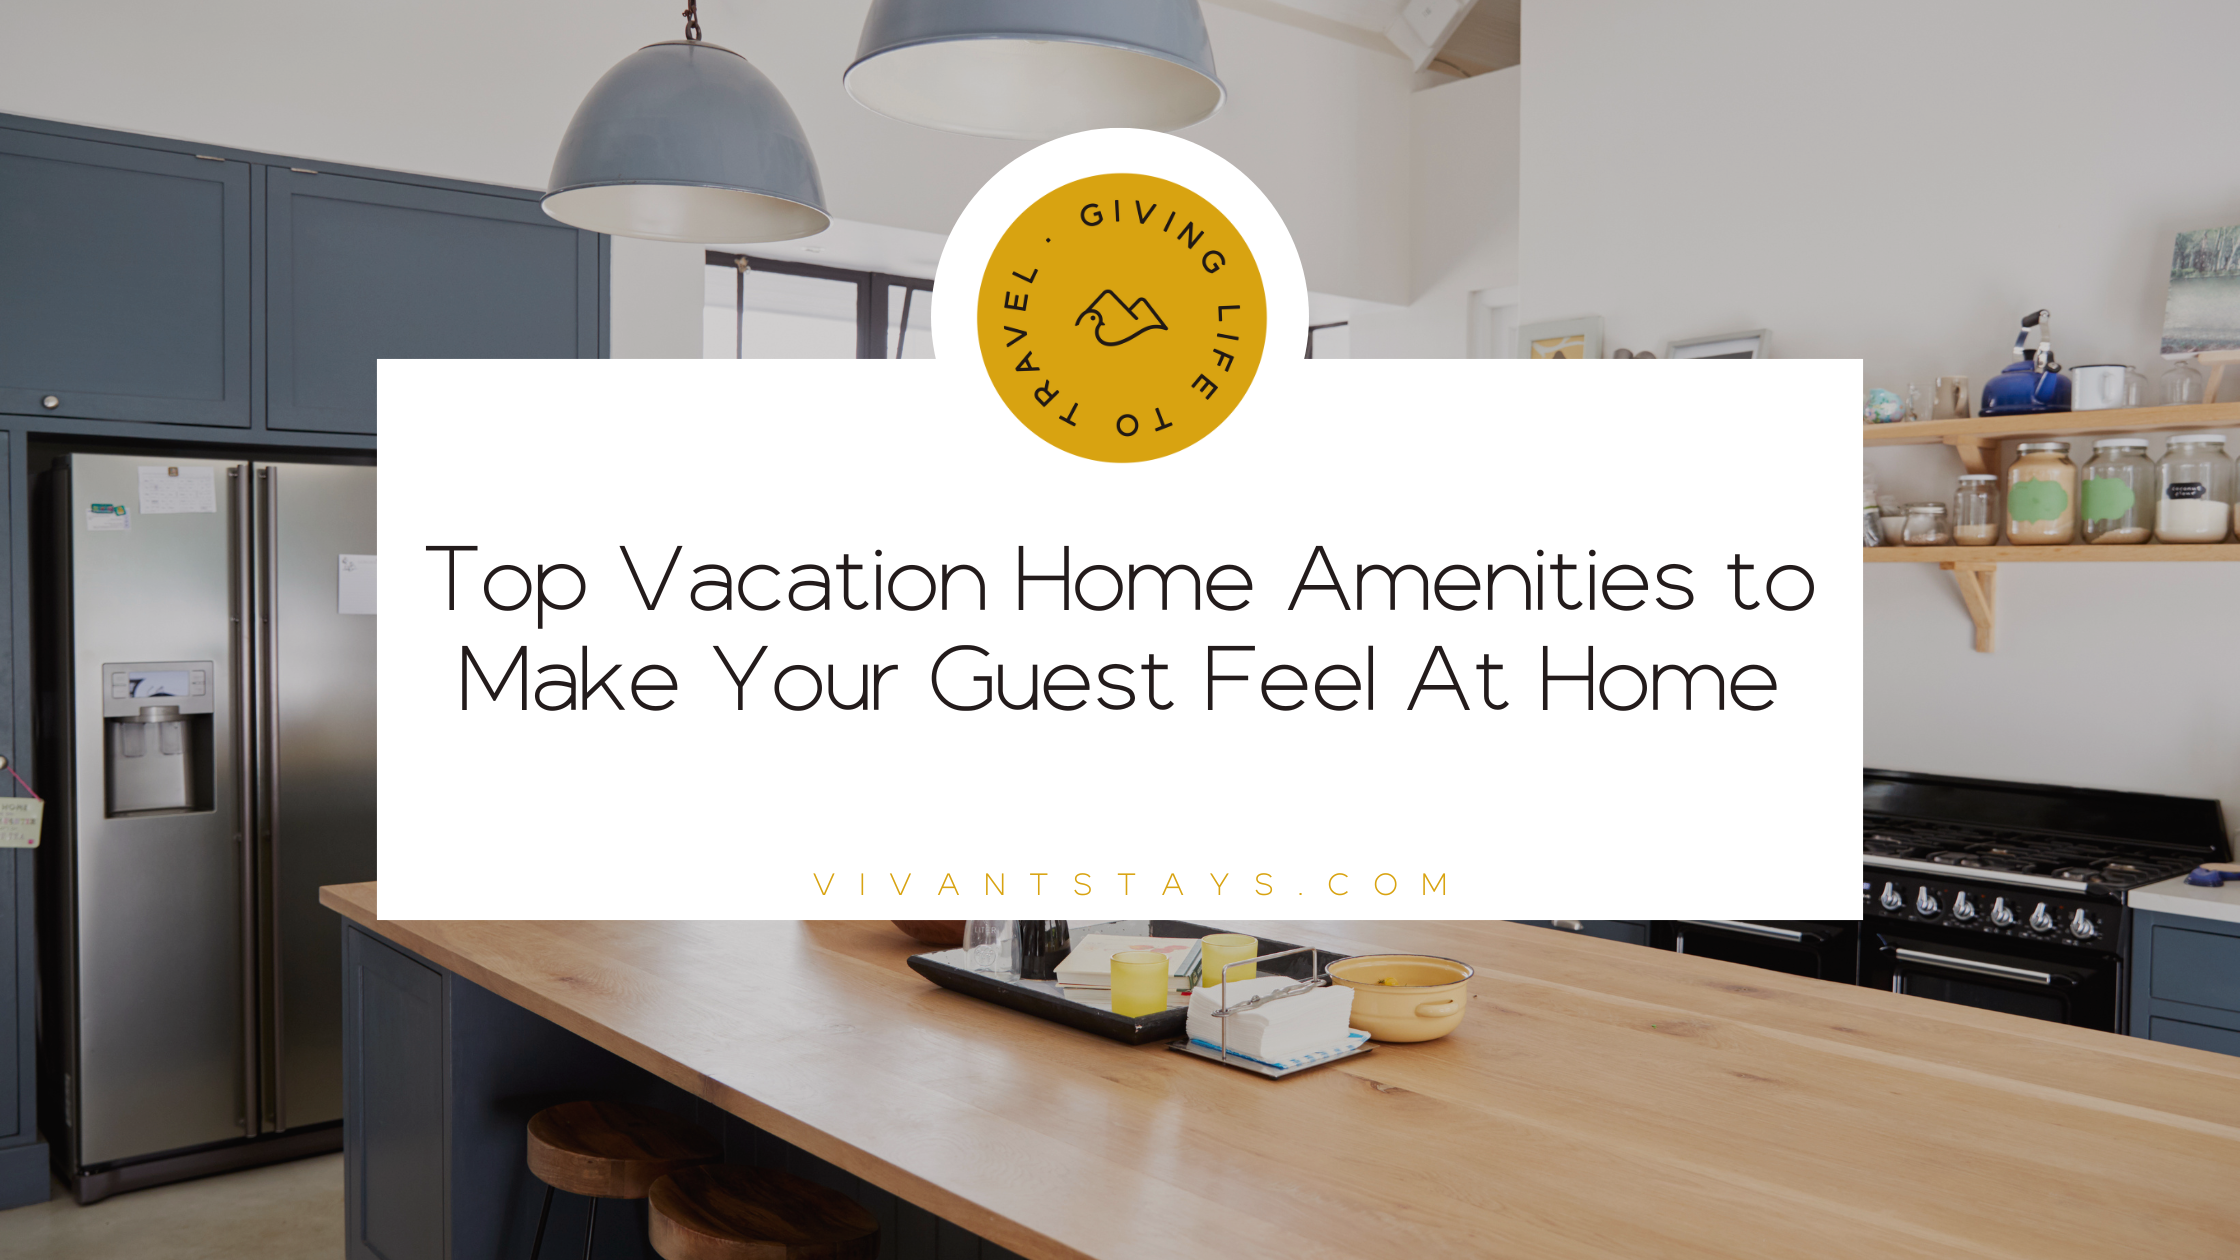 Vivant's blog banner titled "Top Vacation Home Amenities to Make Your Guest Feel At Home"